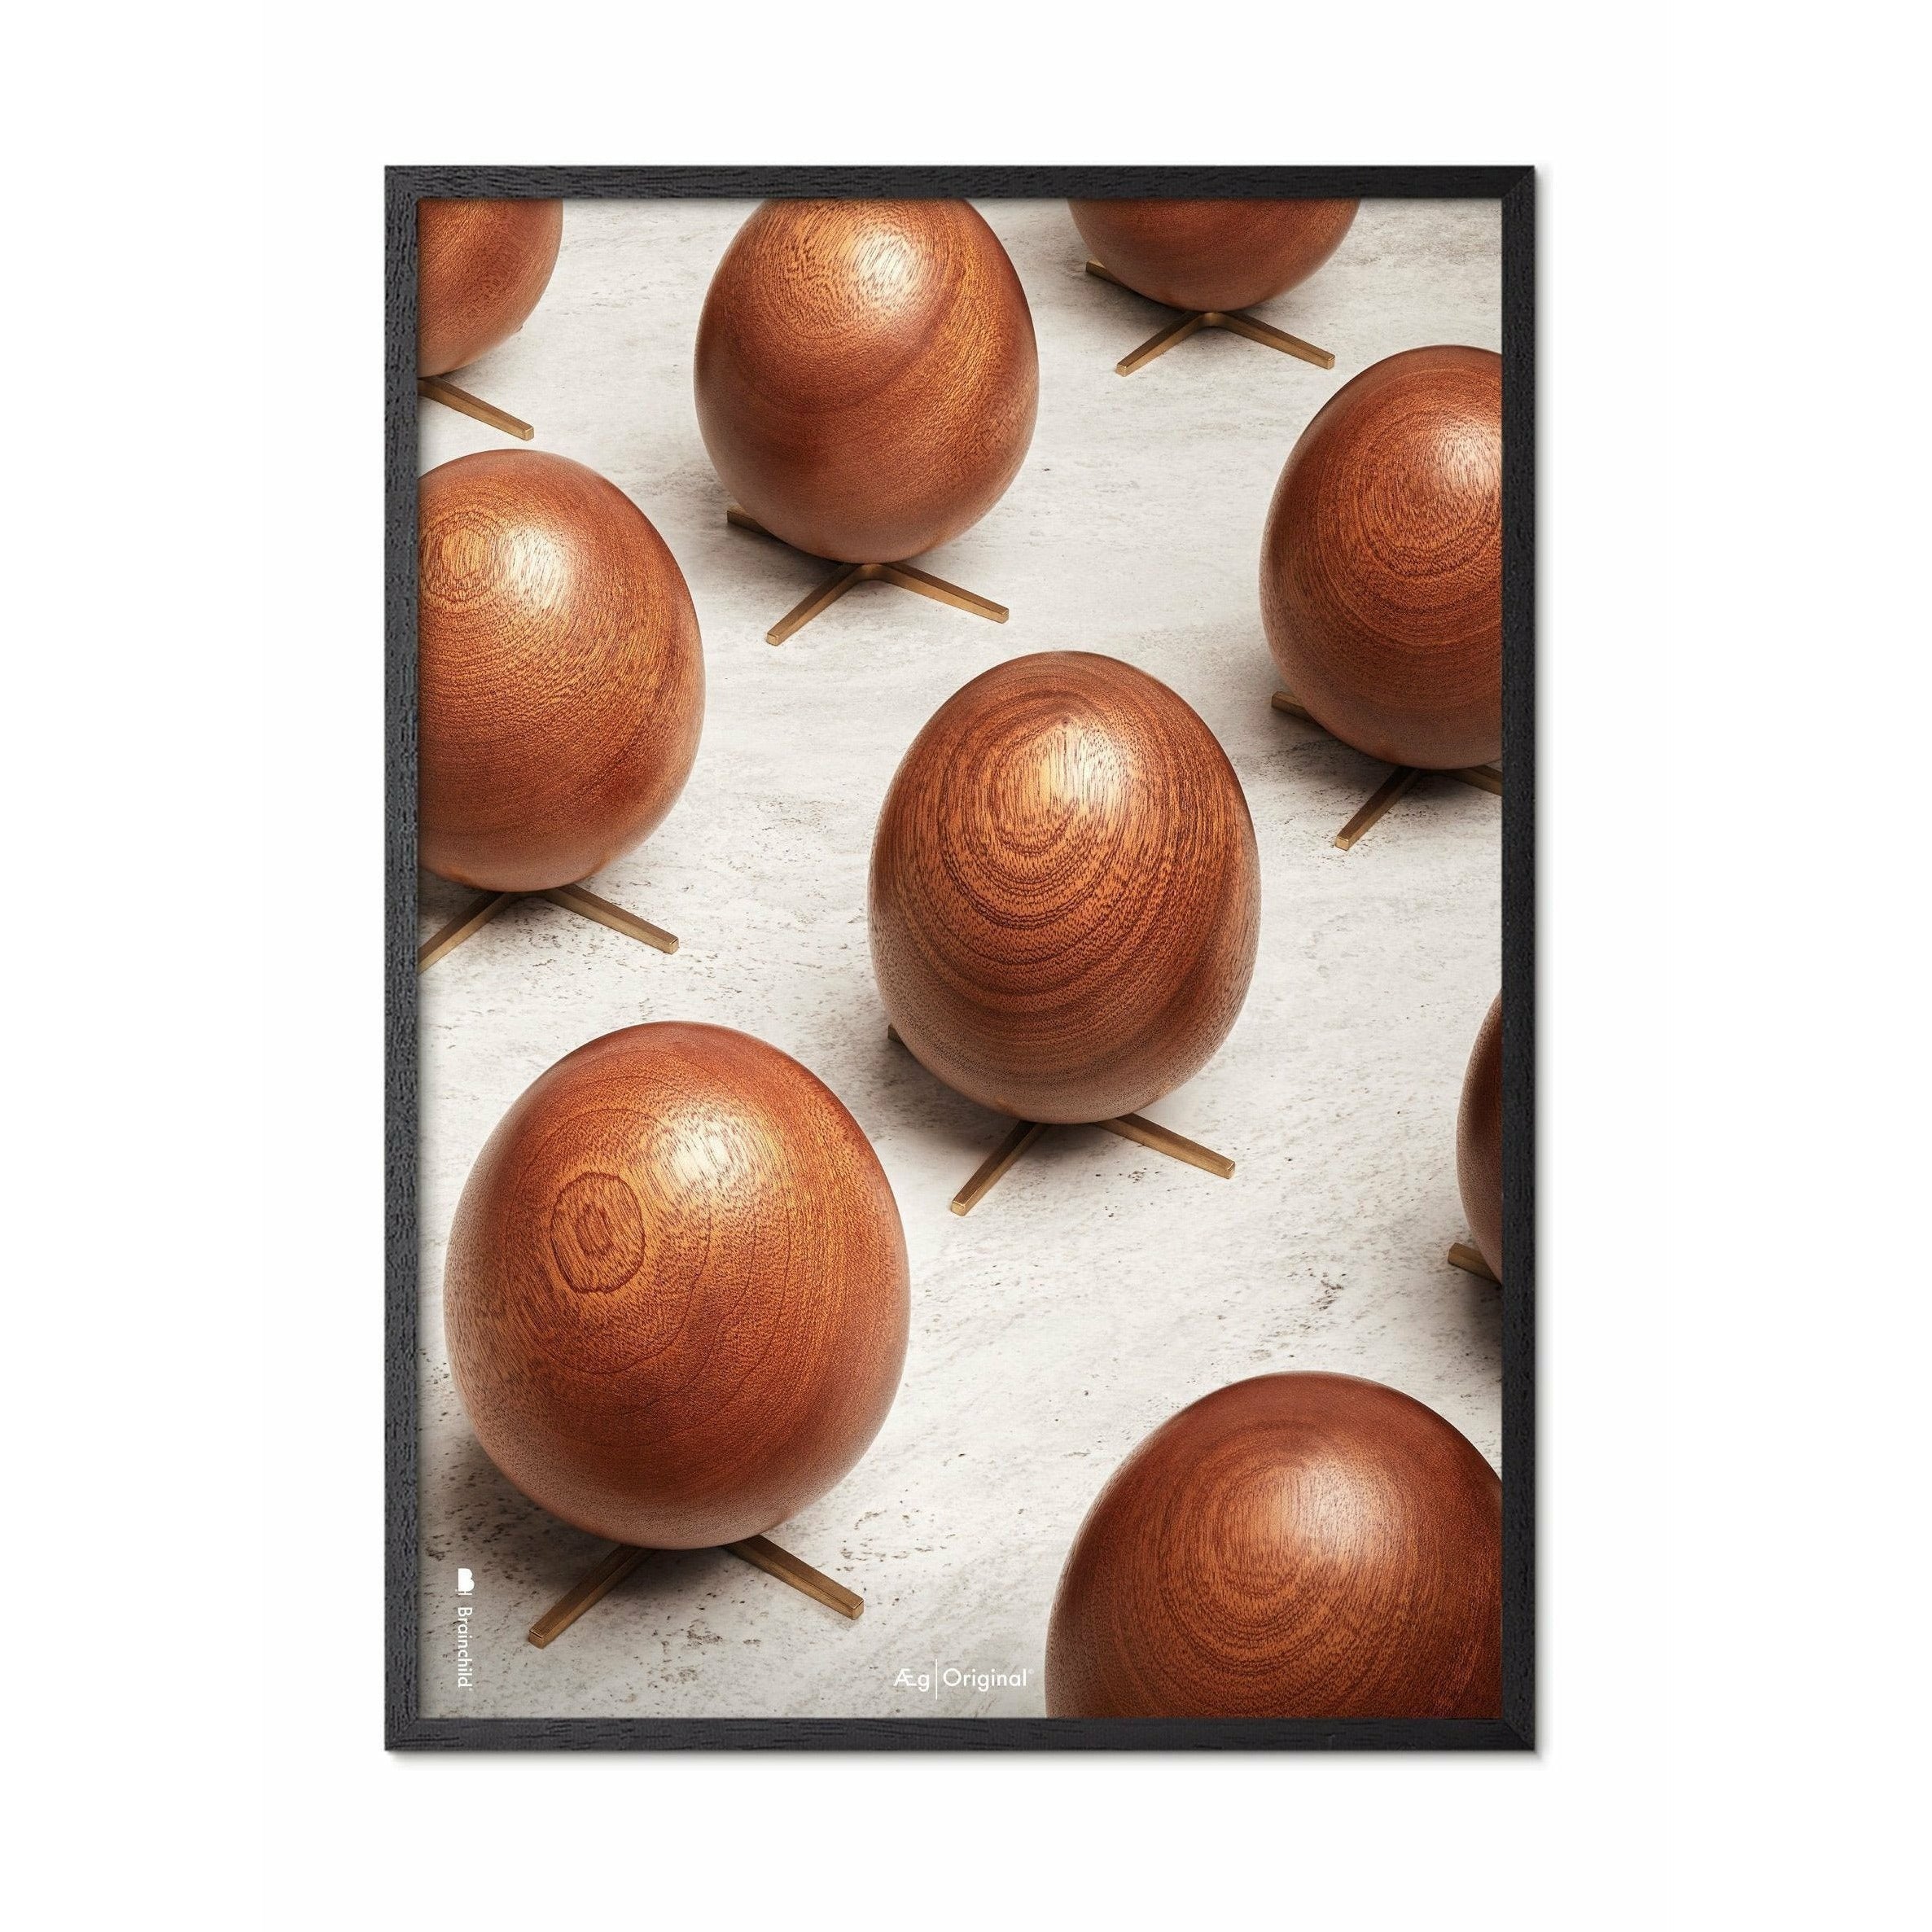 Brainchild Egg Parade Poster, Frame Made Of Black Lacquered Wood, A5